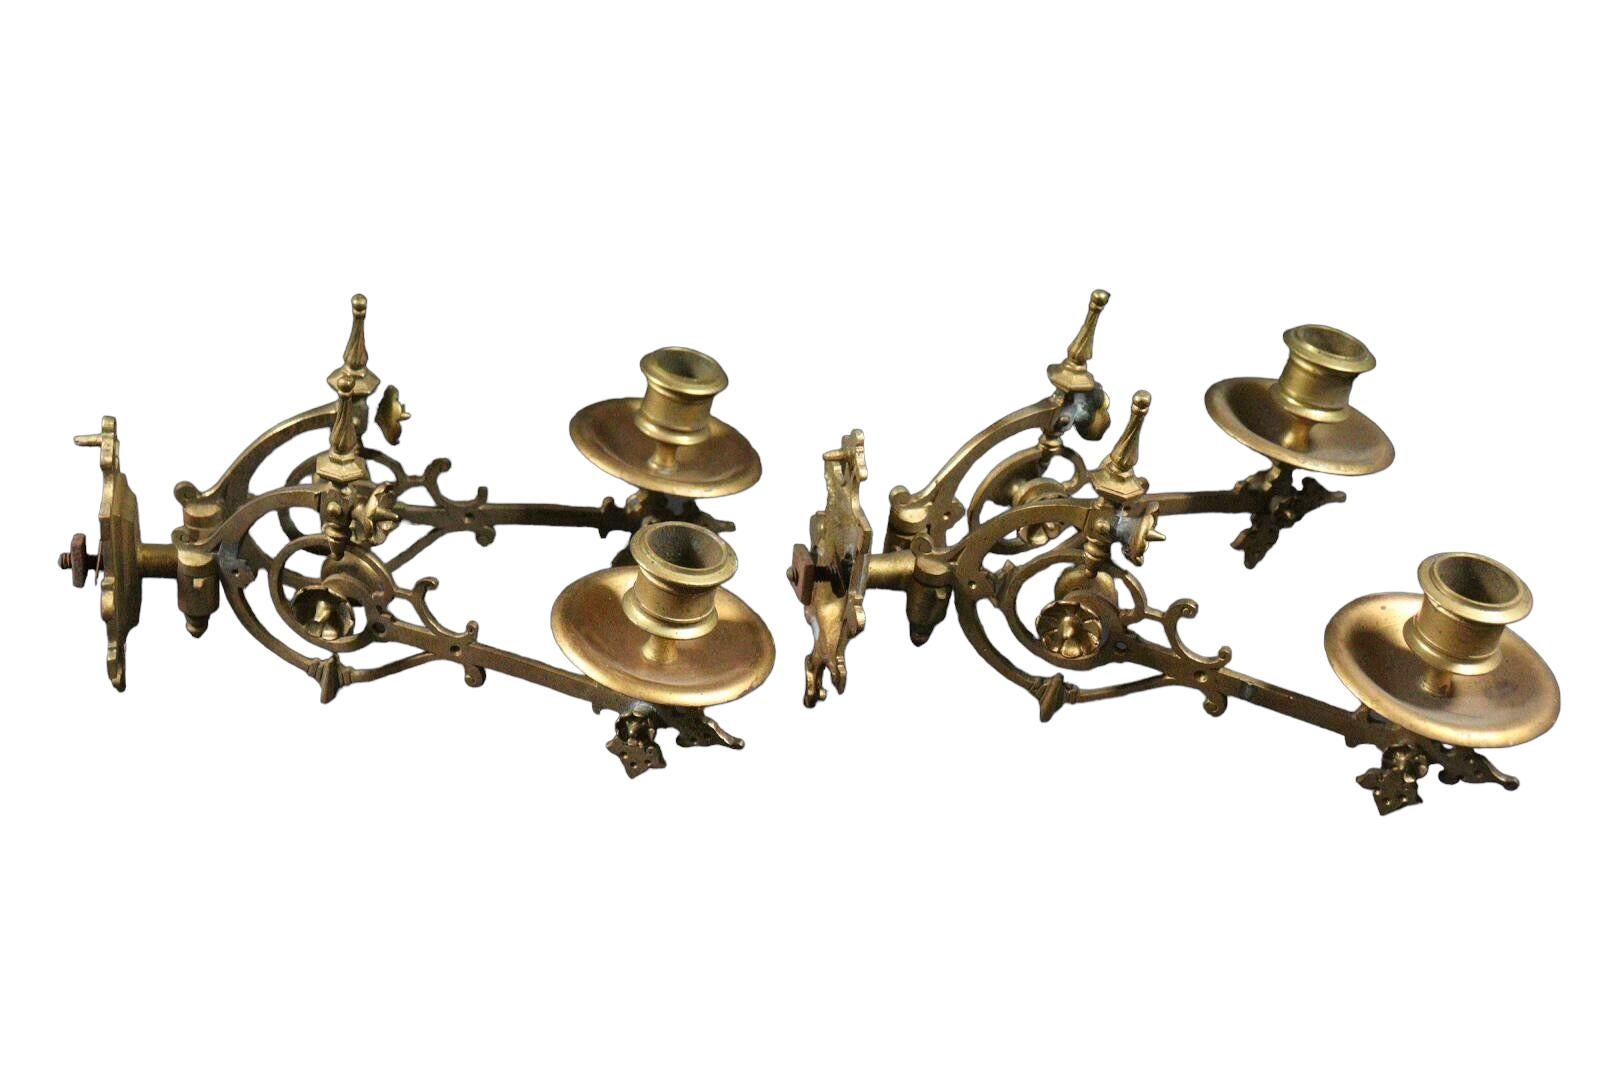 Two Original Bronze Art Nouveau Candle Sconce for a Piano or Wall Germany, 1890s For Sale 2